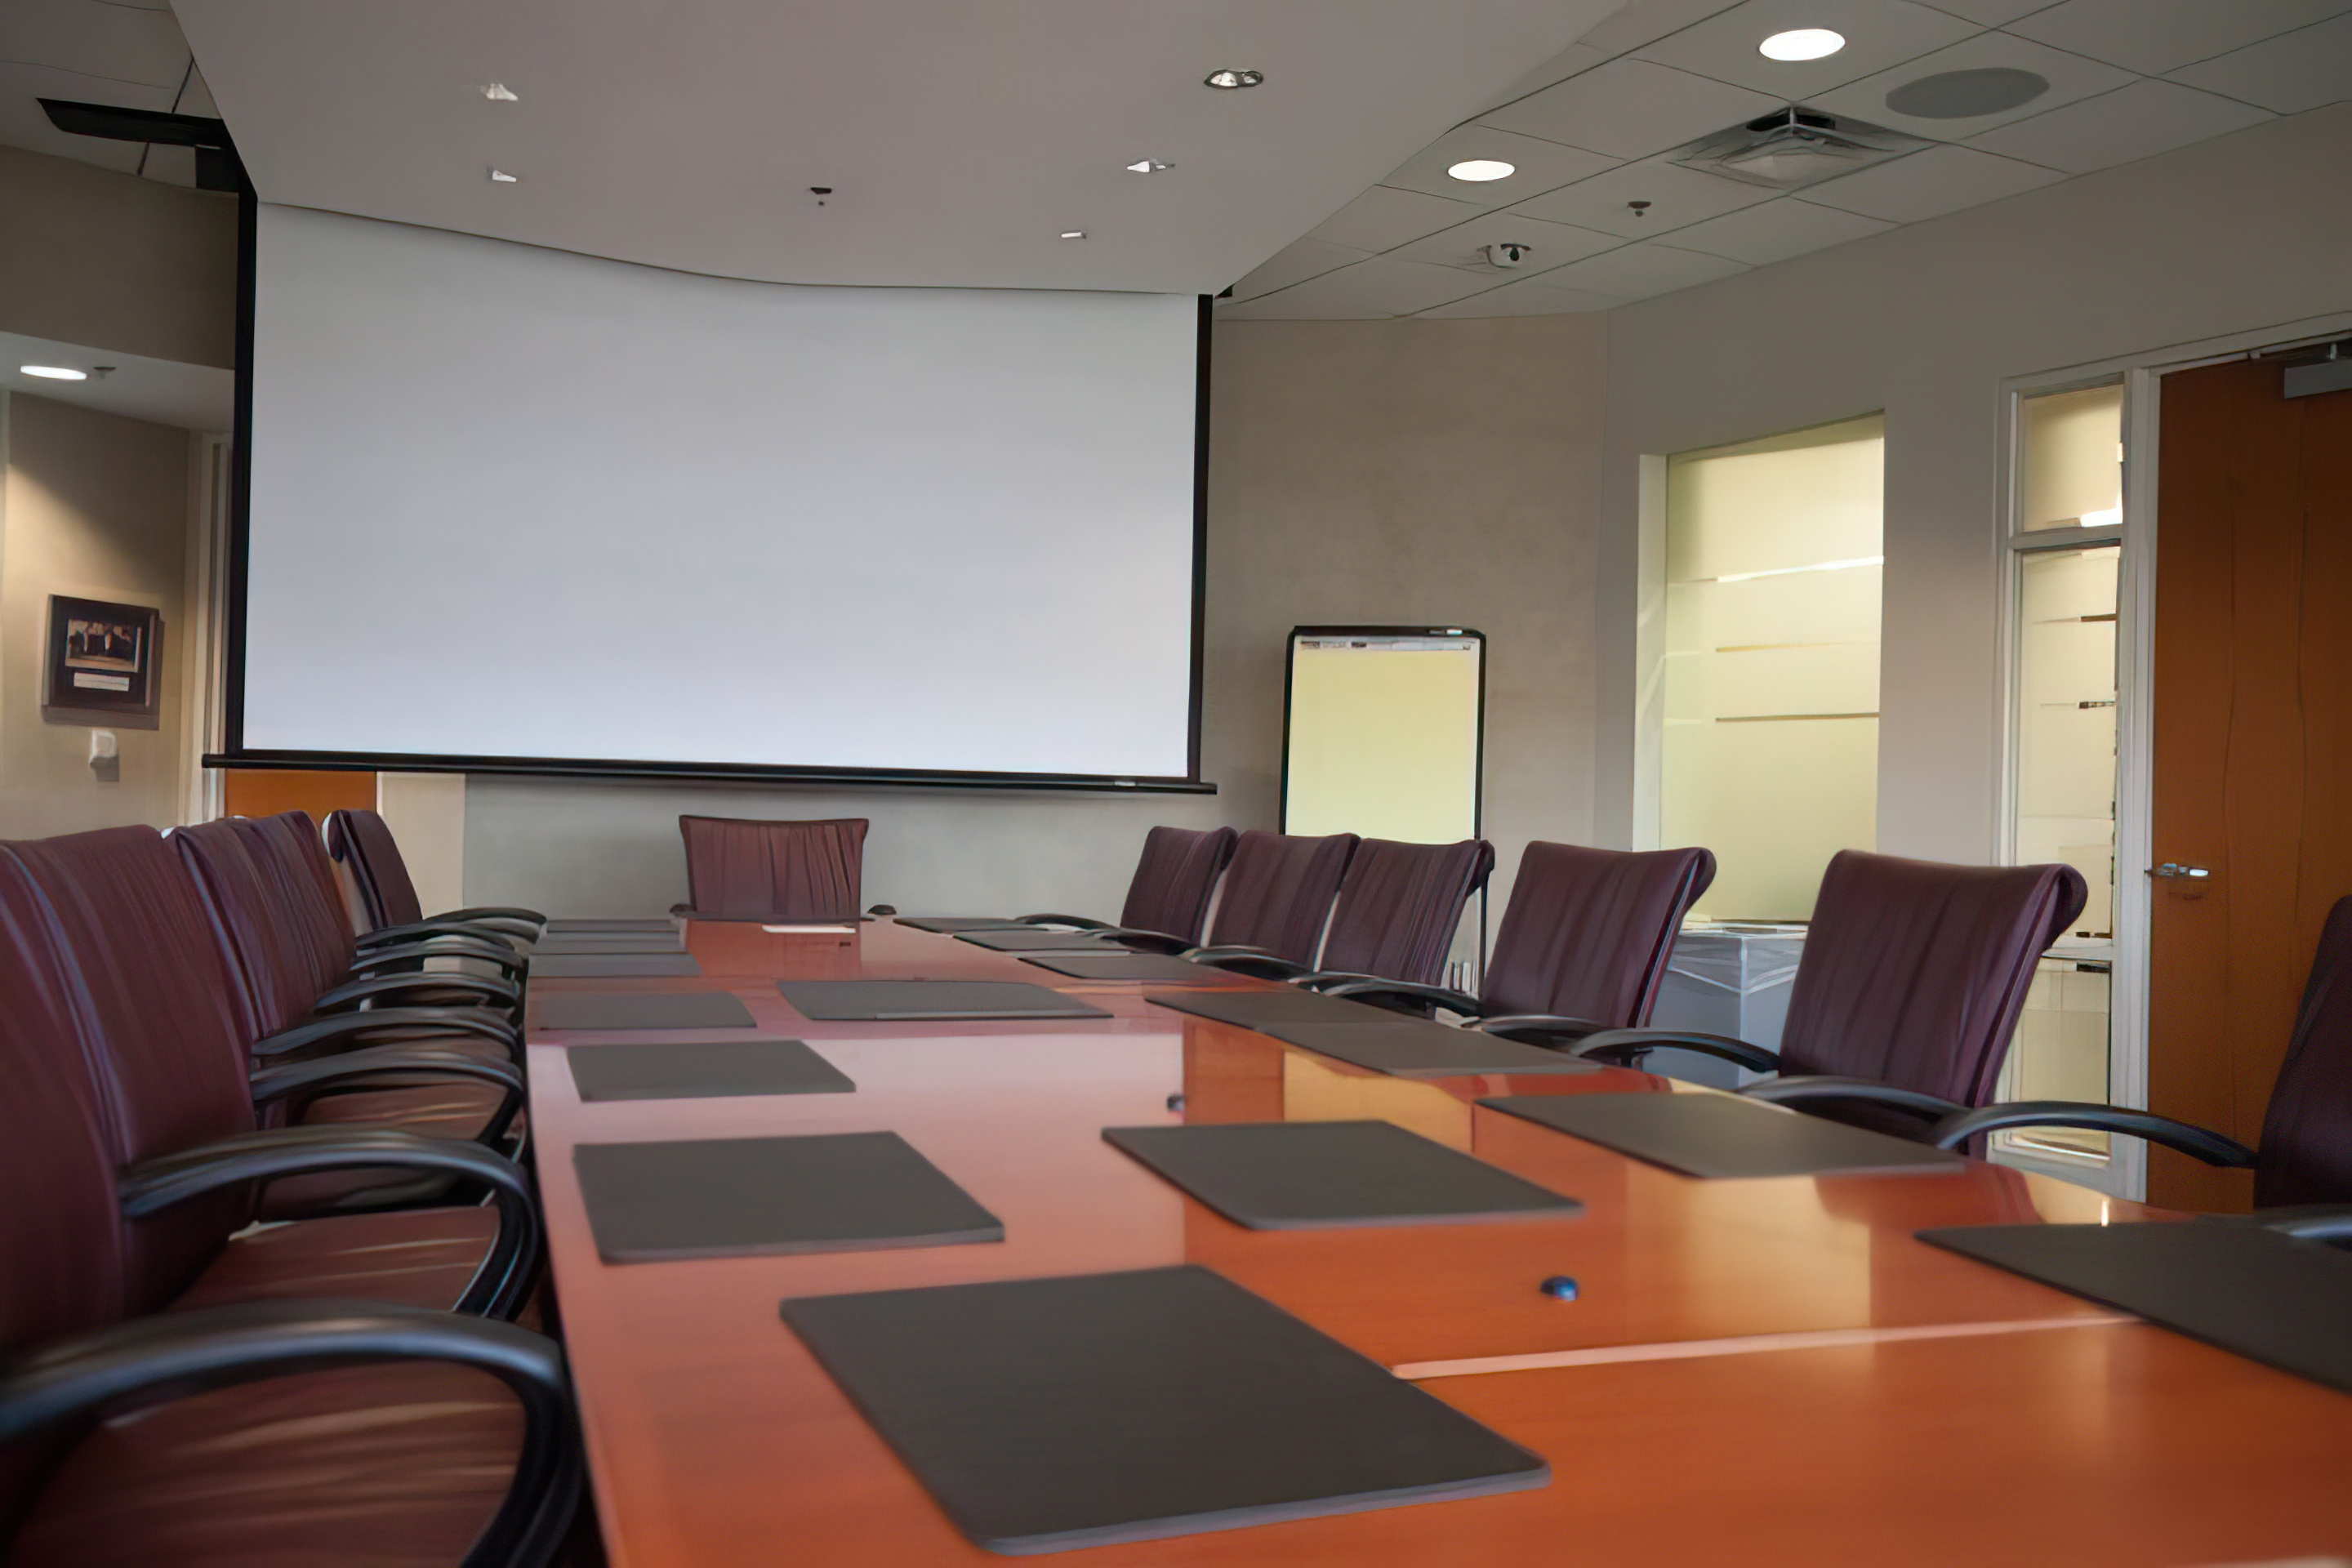 A large conference table, surrounded by office chairs, faces a pull-down projection screen.